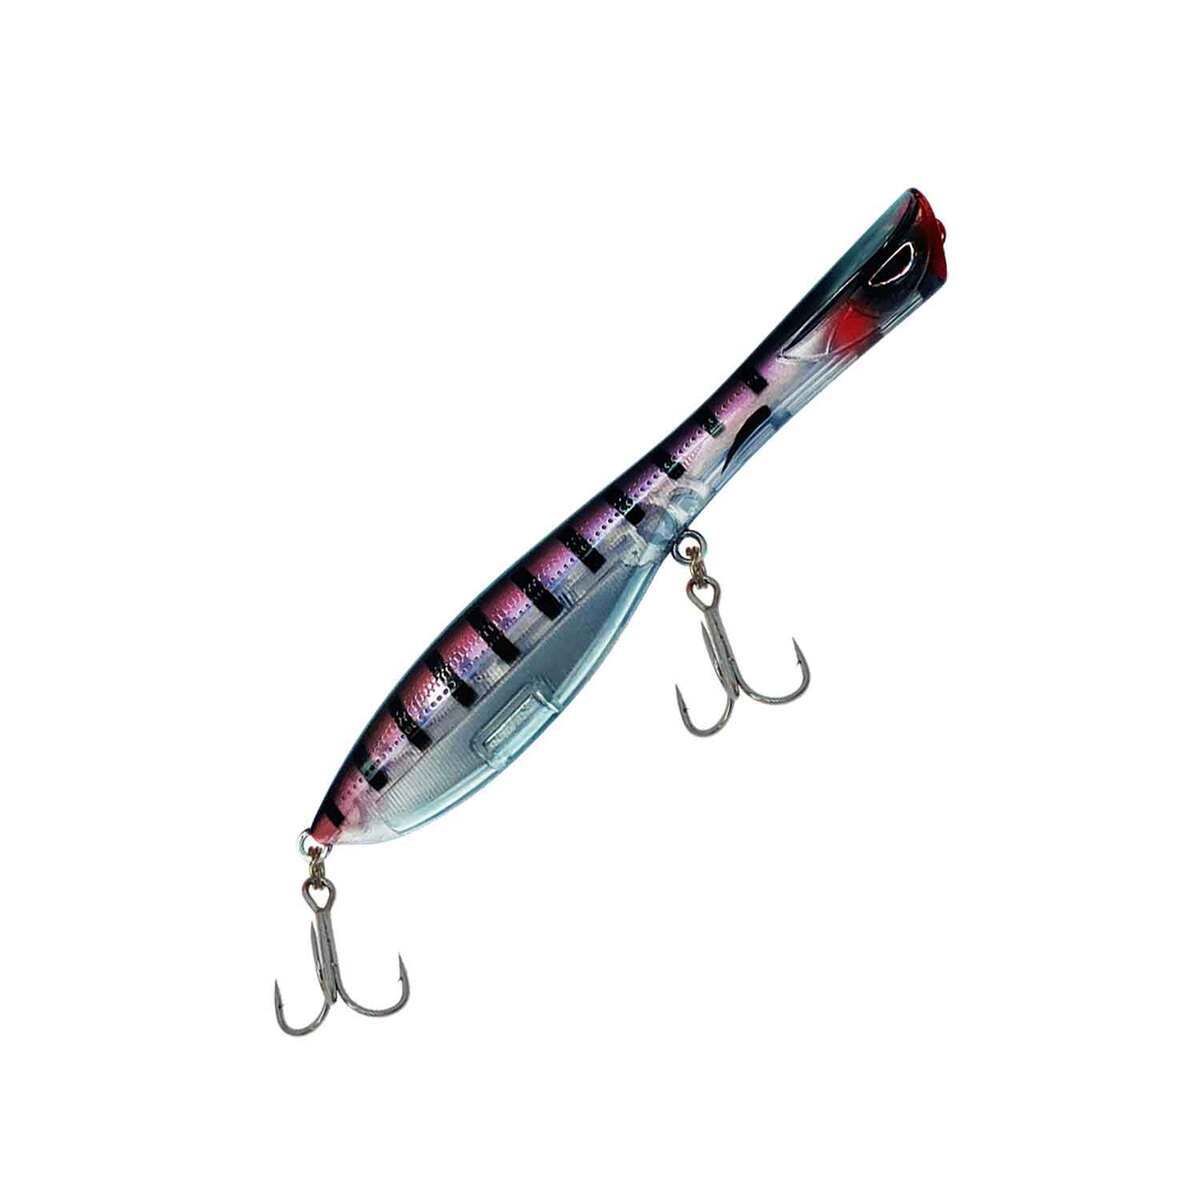 Nomad Design Dartwing 125 Floating Rip Bait - The Grunt, 5in, 5/8oz